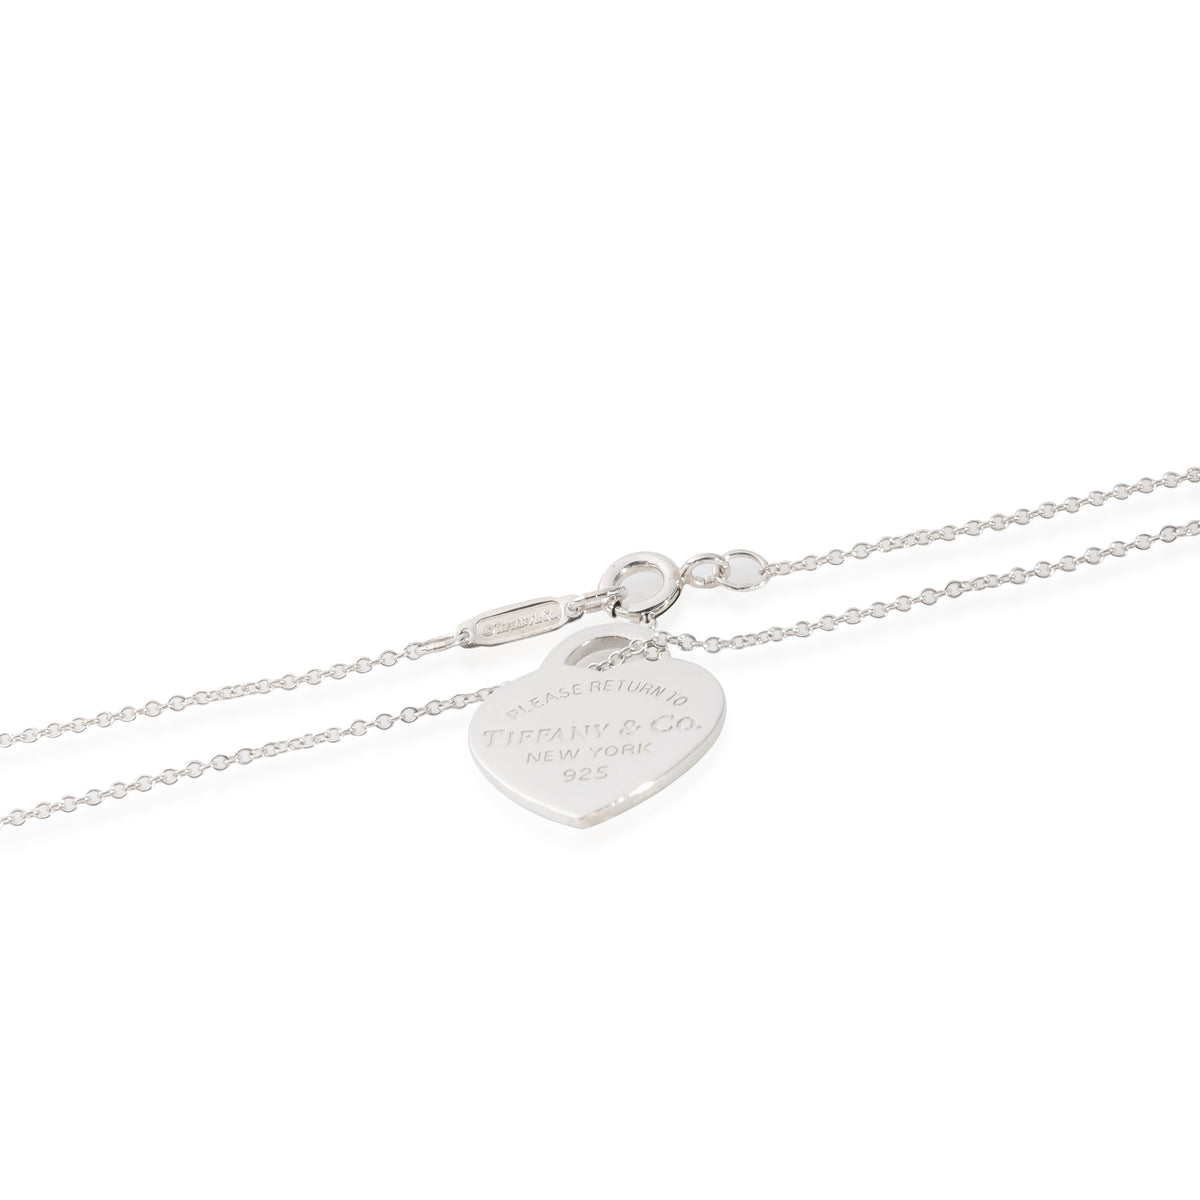 Tiffany & Co. Return To Tiffany Heart Tag Sterling Silver Necklace – I MISS  YOU VINTAGE